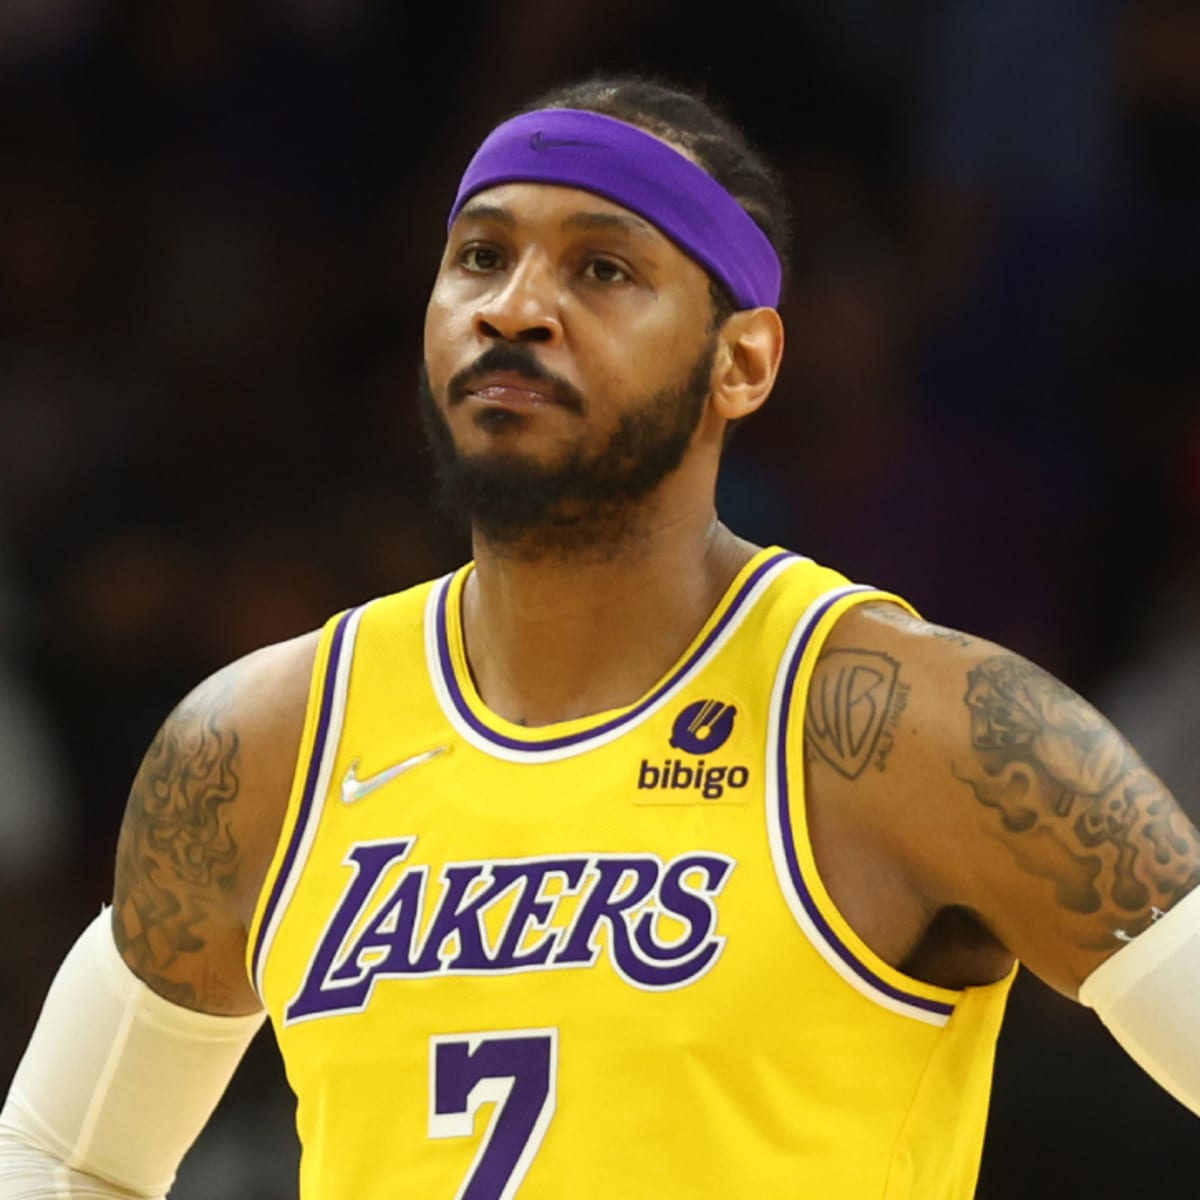 NBA Star Carmelo Anthony Announces His Retirement After 19 Seasons